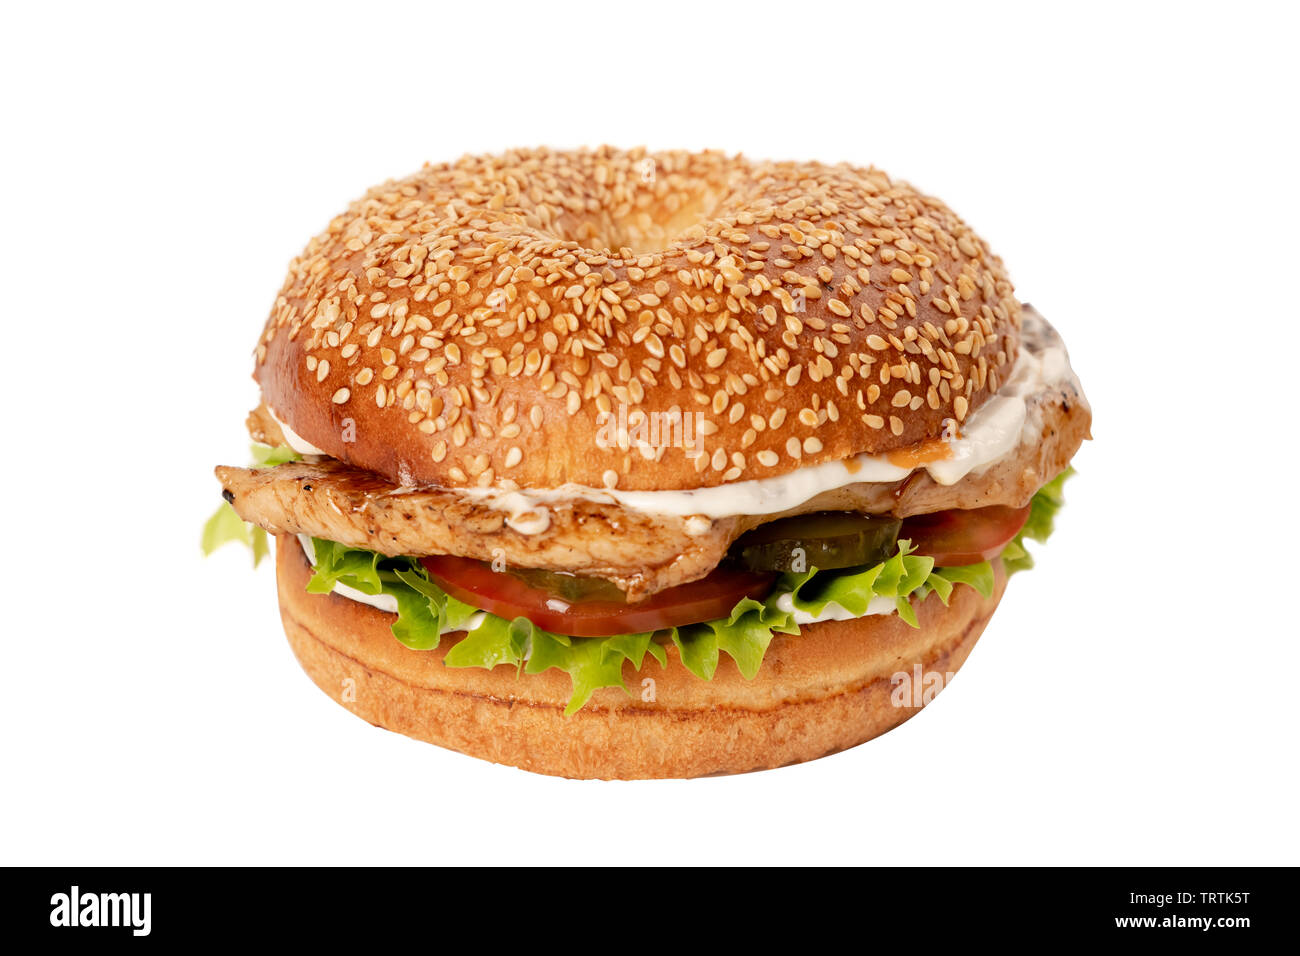 Juicy Burger on white isolated background. Bun with sesame seeds. The theme of eating fast food Stock Photo